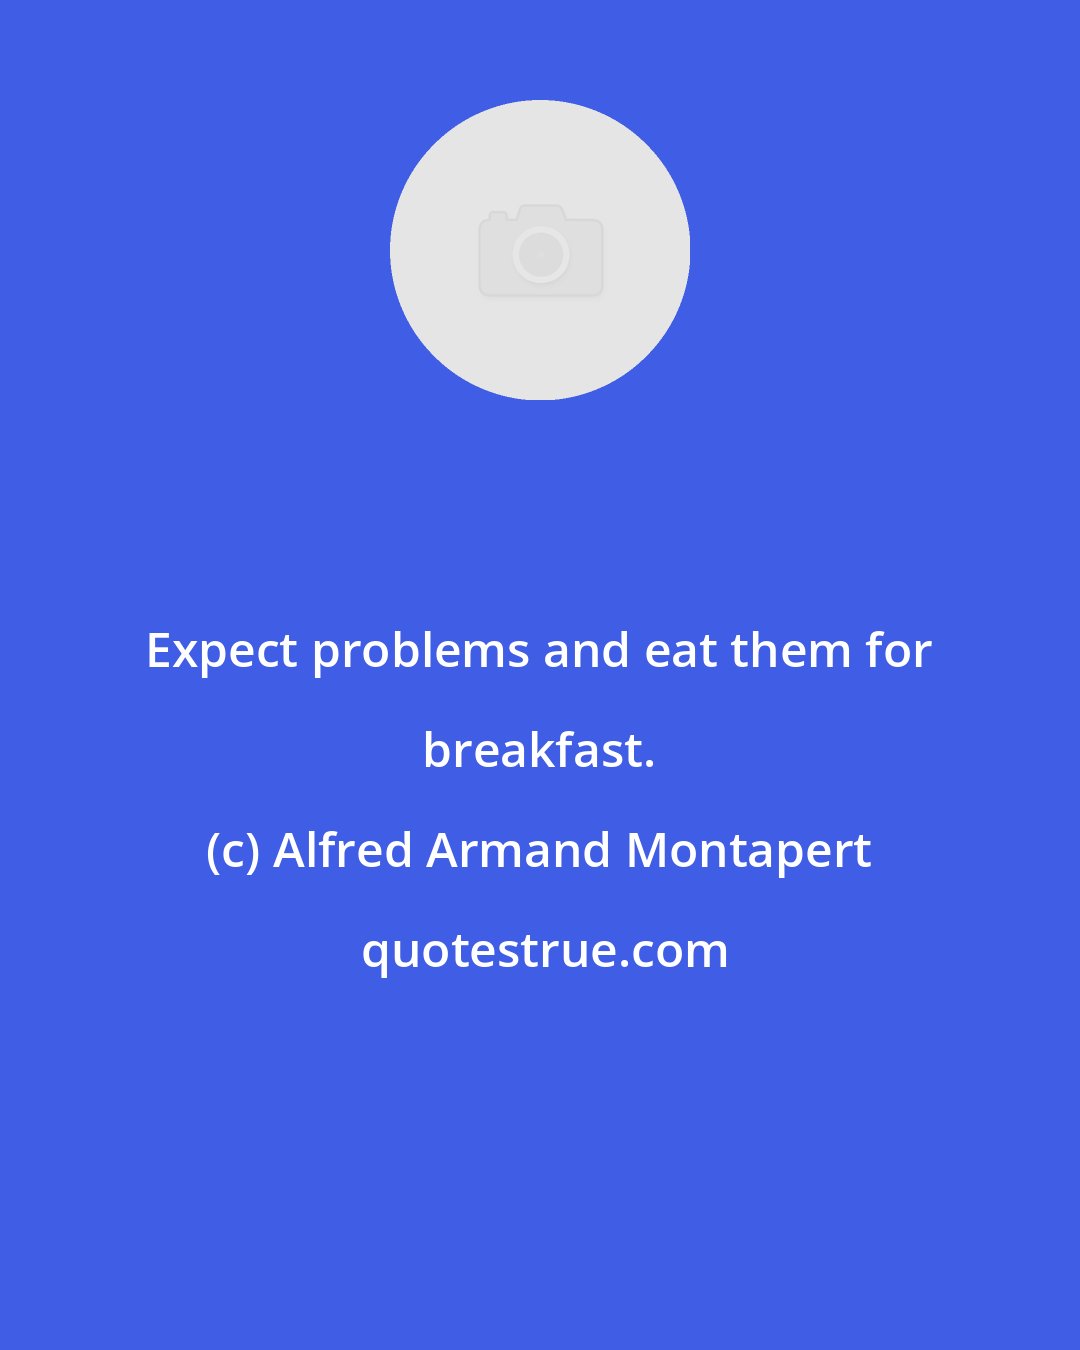 Alfred Armand Montapert: Expect problems and eat them for breakfast.